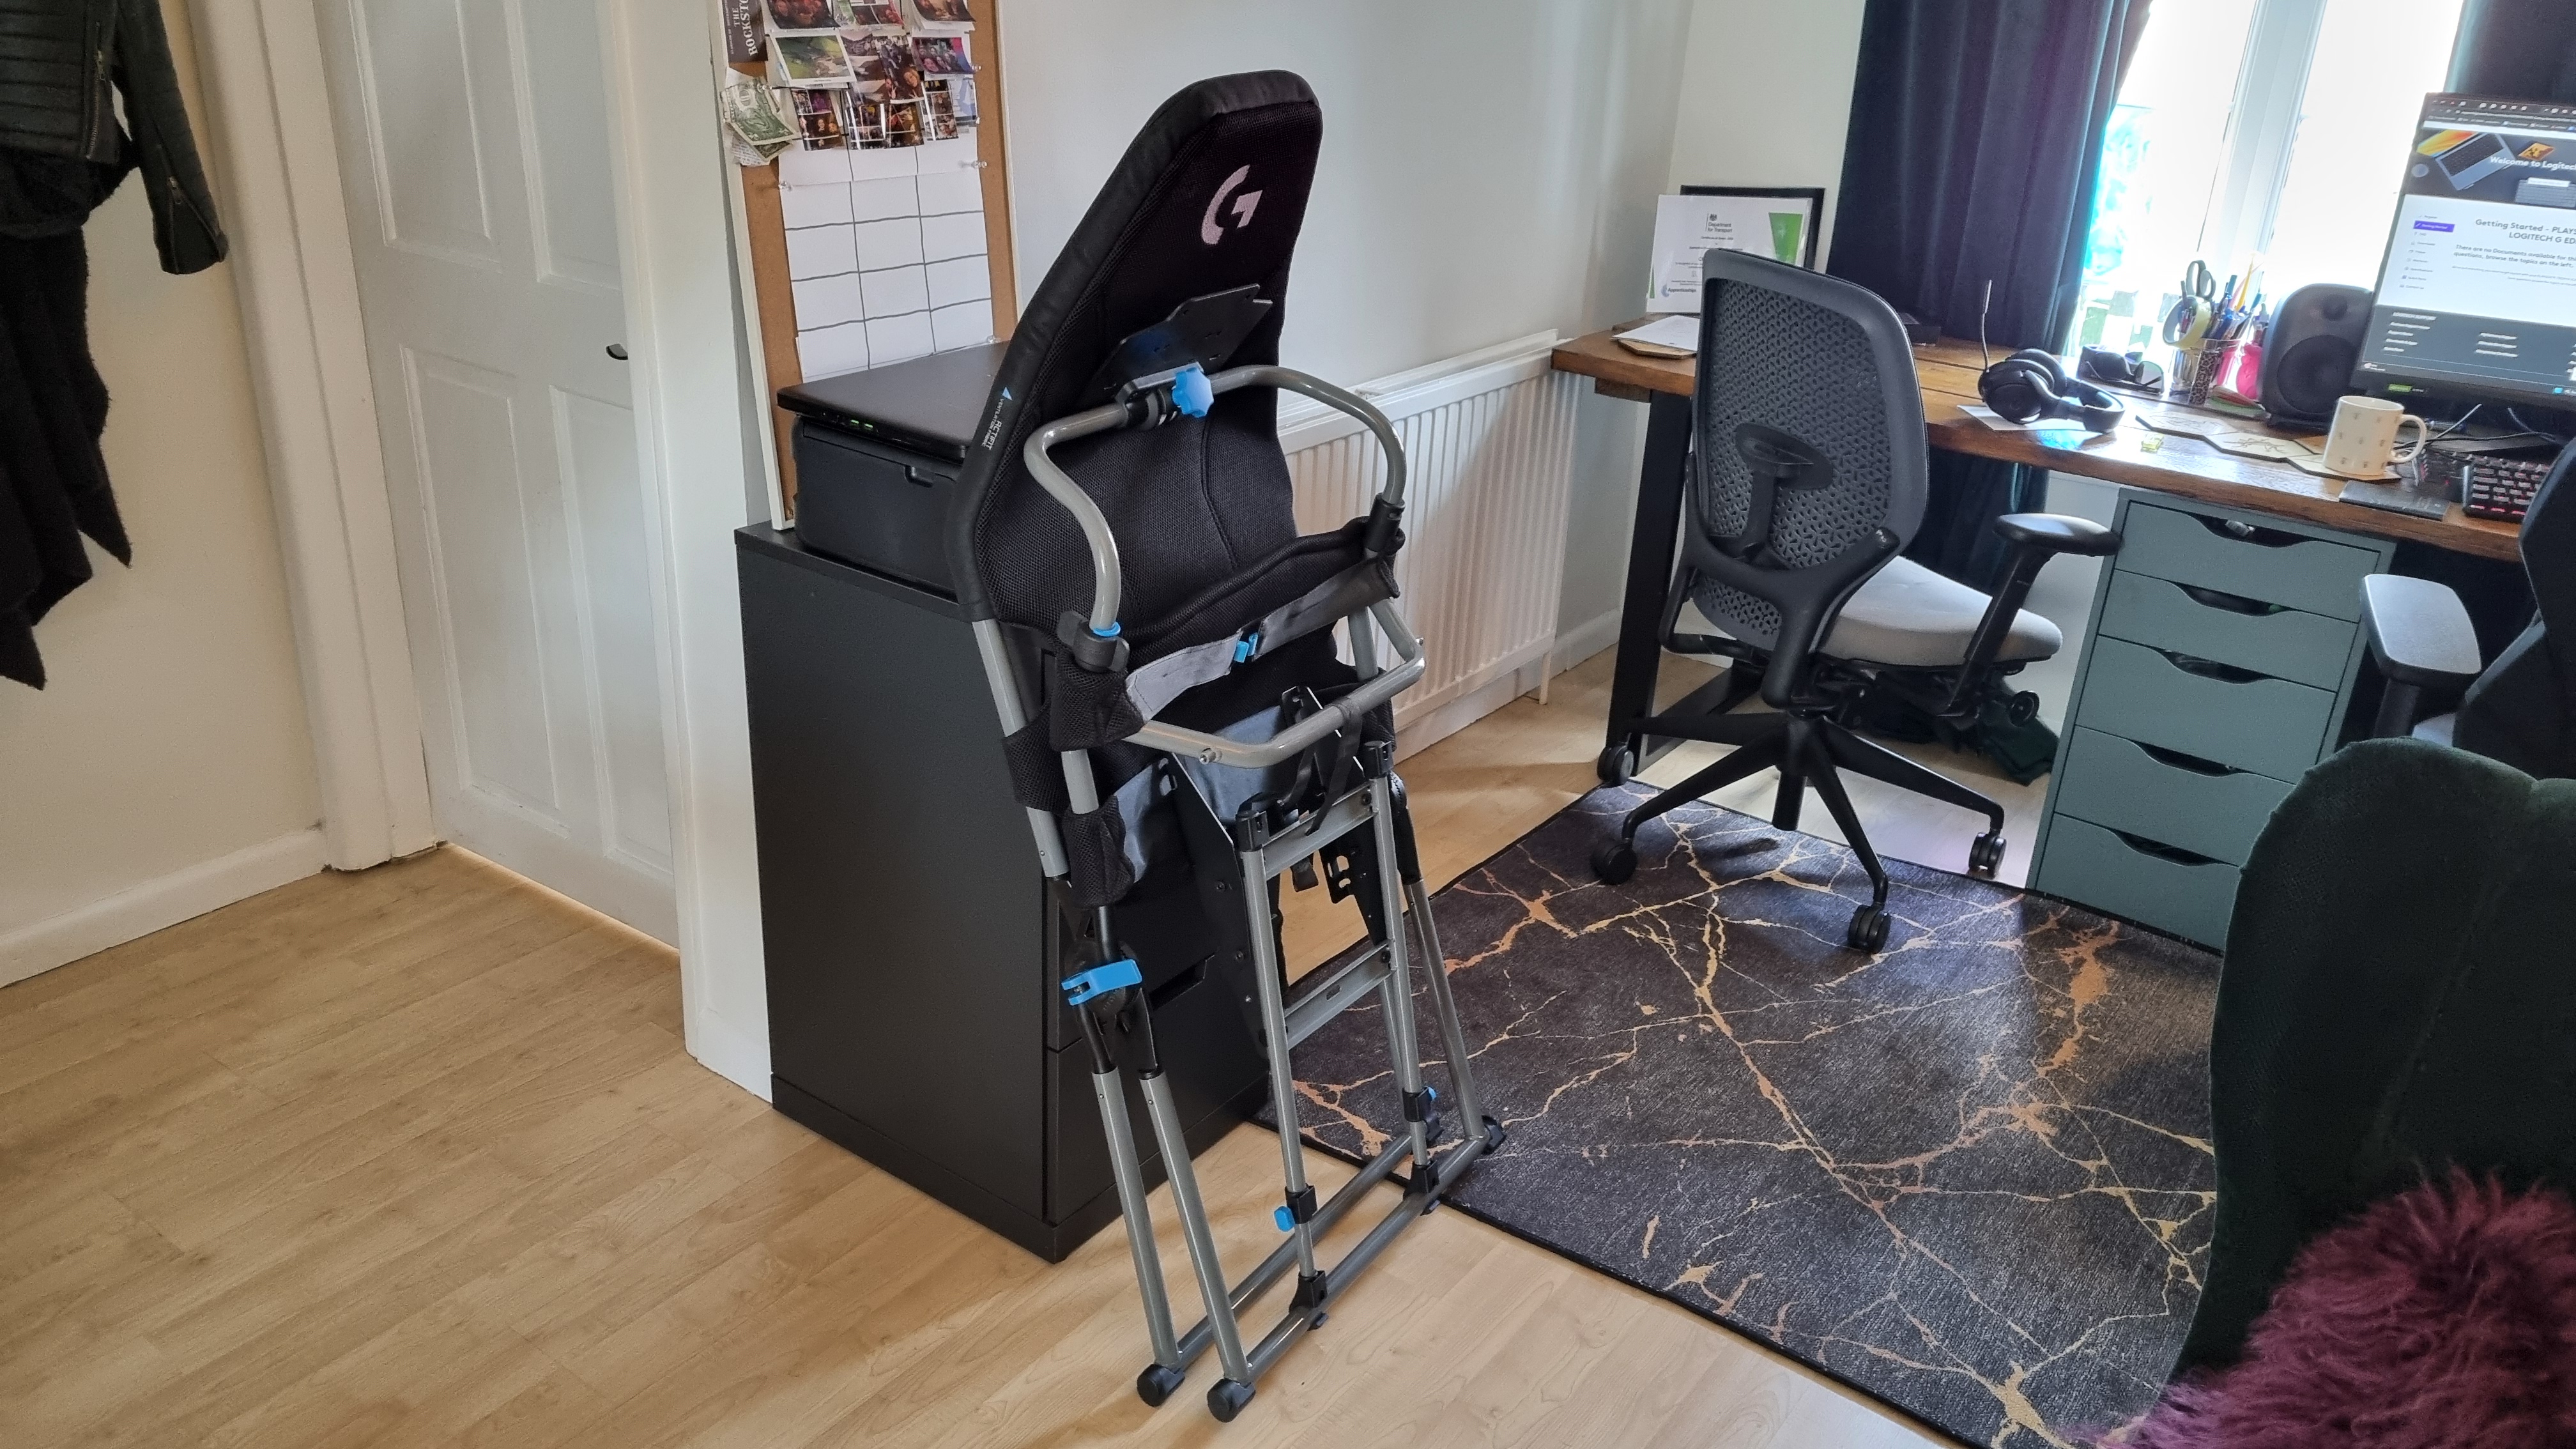 The Logitech Playseat Challenge X, folded up against a filing cabinet